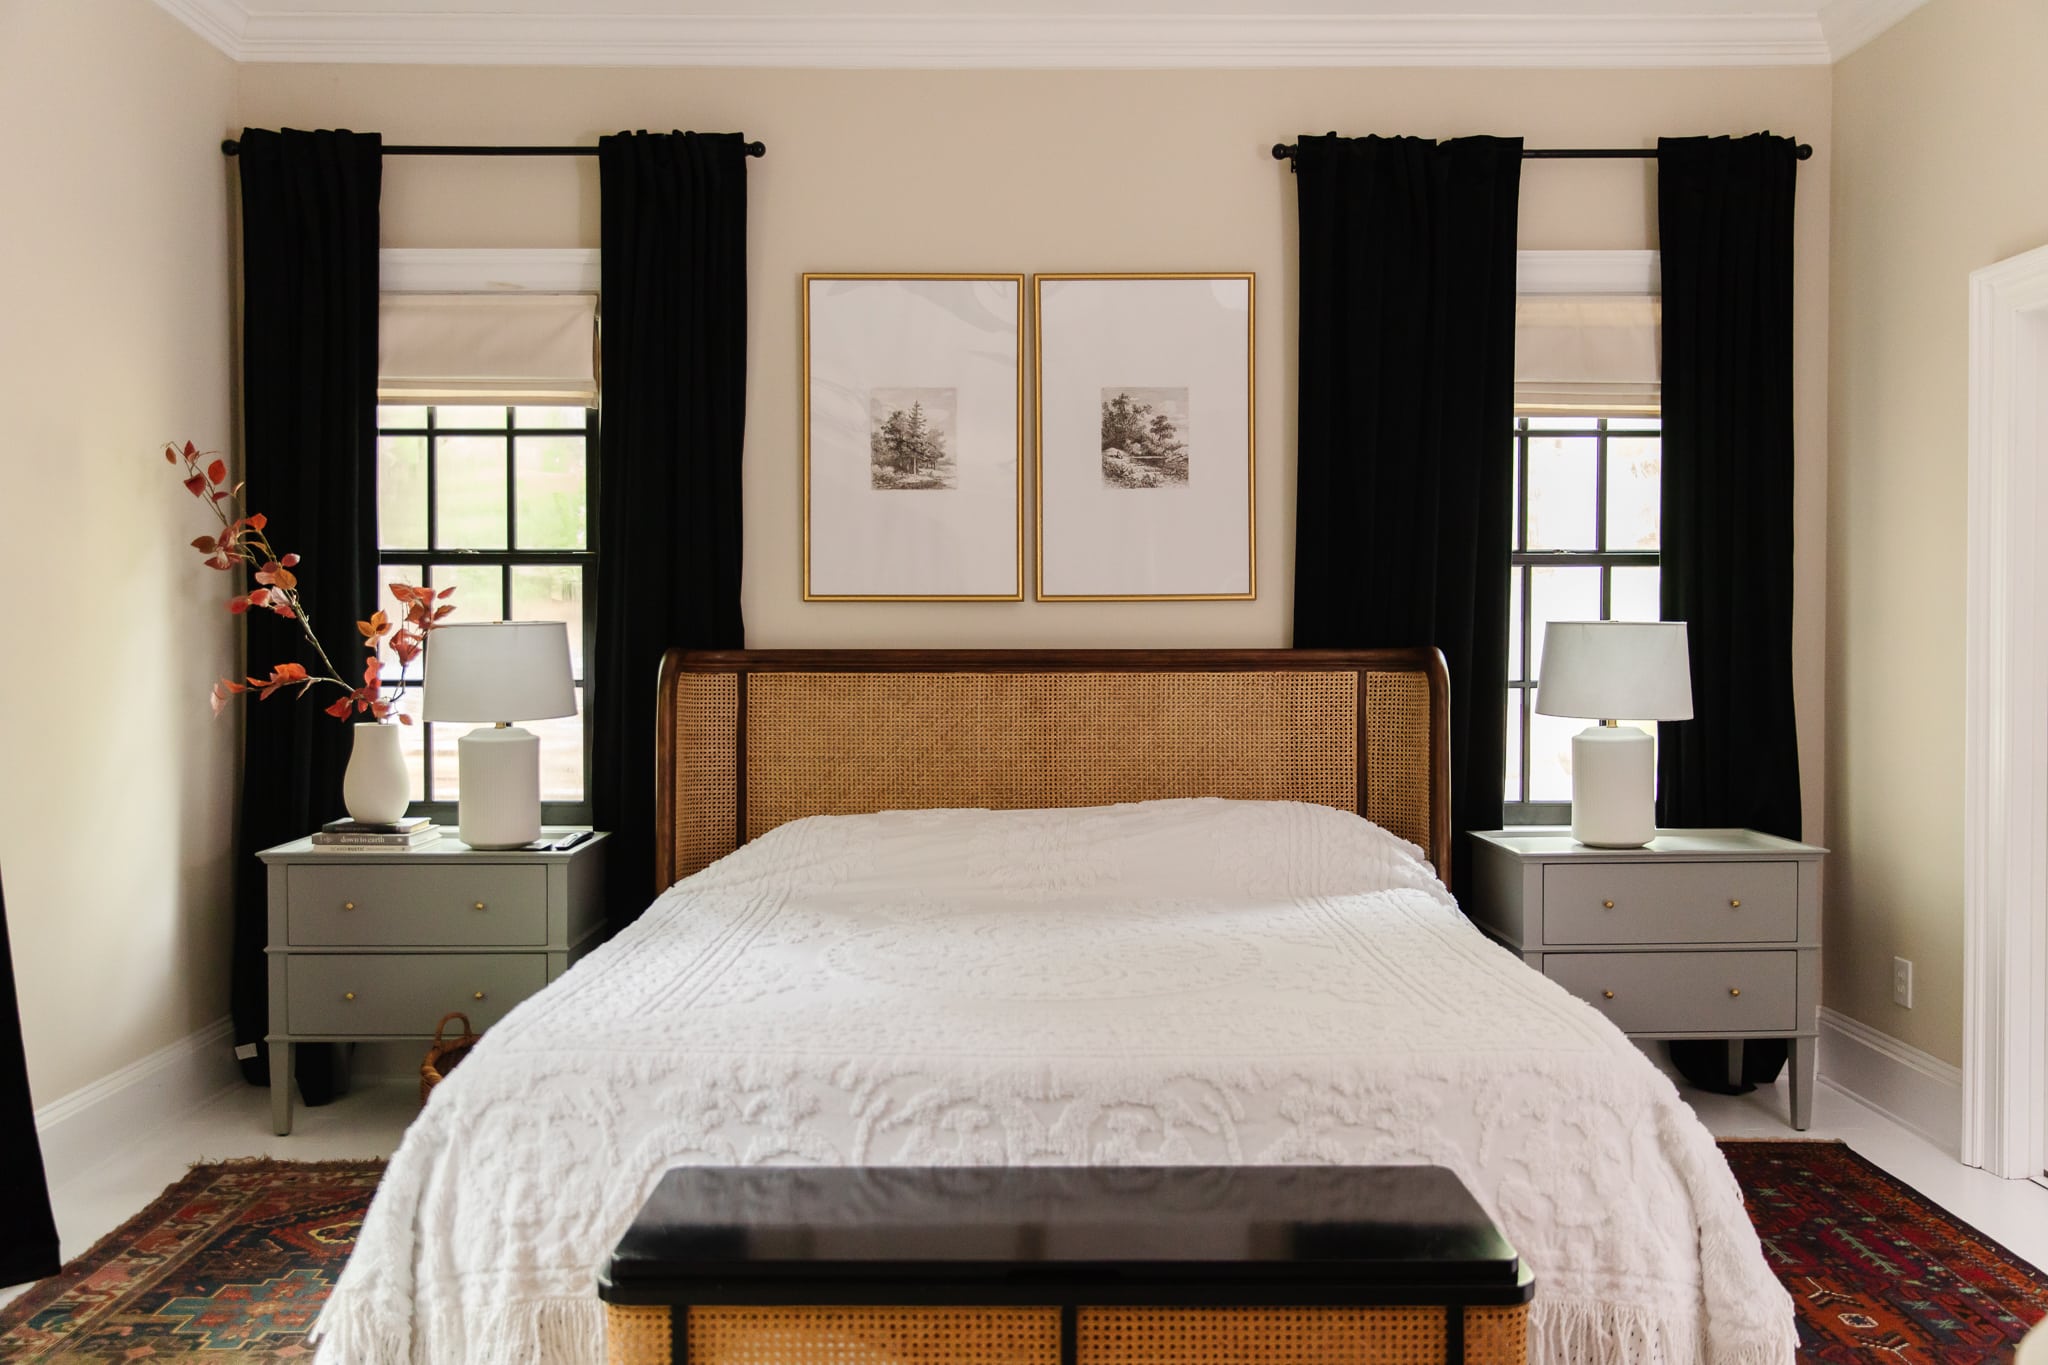 Chris Loves Julia | Guest house bed with white coverlet, black curtains and caned back headboard